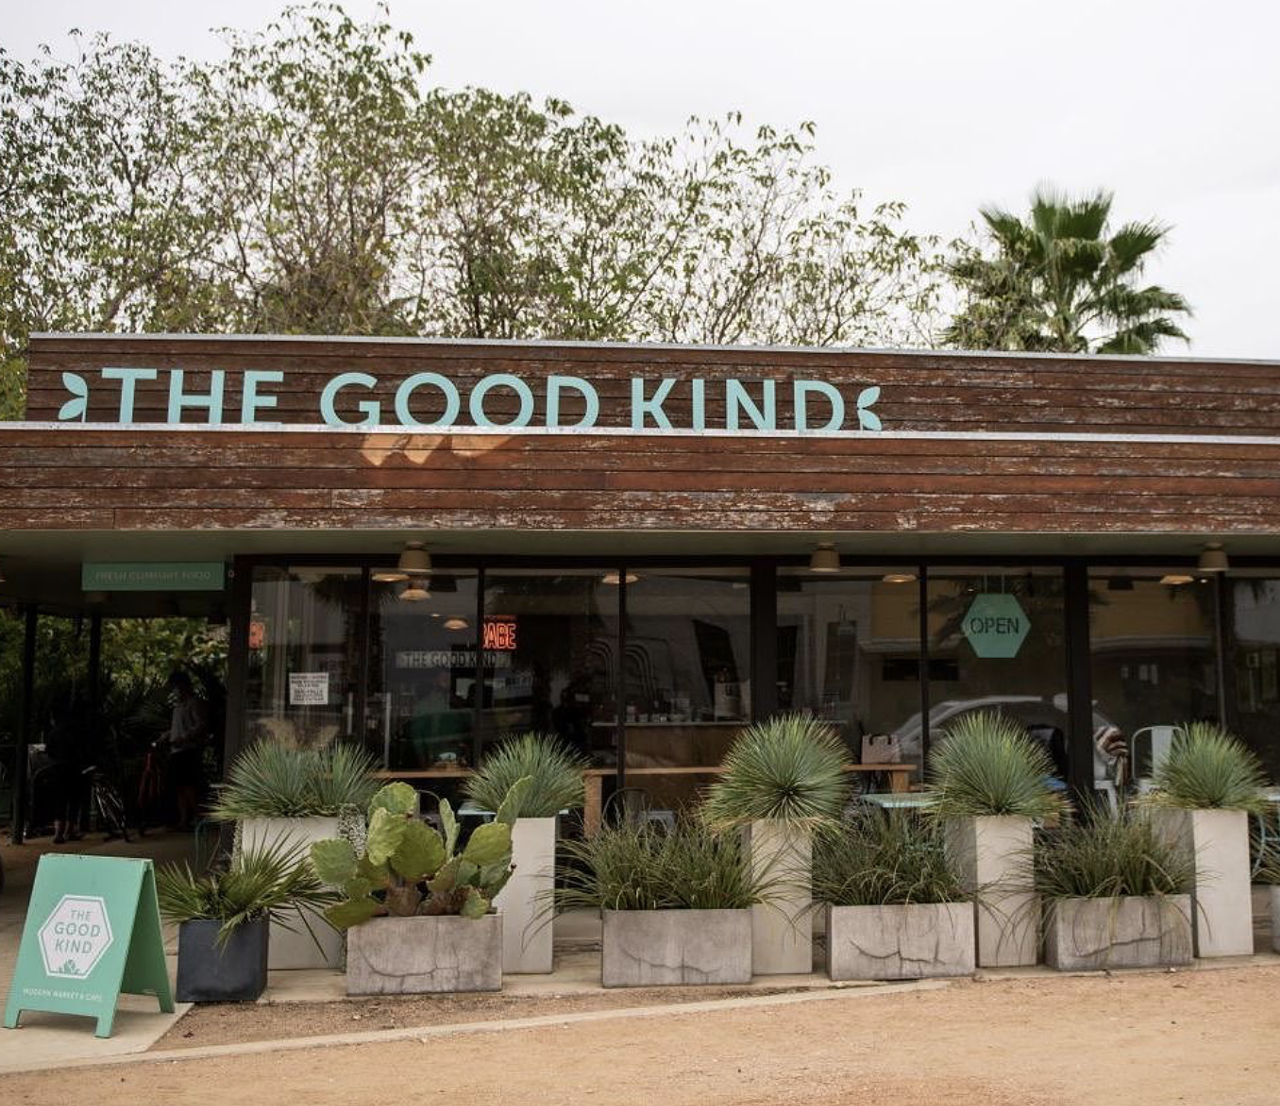 The Good Kind
1127 S St Mary’s St, (210) 801-5892, eatgoodkind.com
This garden eatery offers several areas in which to lounge in the lush flora that covers the property. Our favorite spot is nestled between mature palm trees and Bougainvillea, set away from the crowd.
Photo via Instagram / goodkindsouthtown